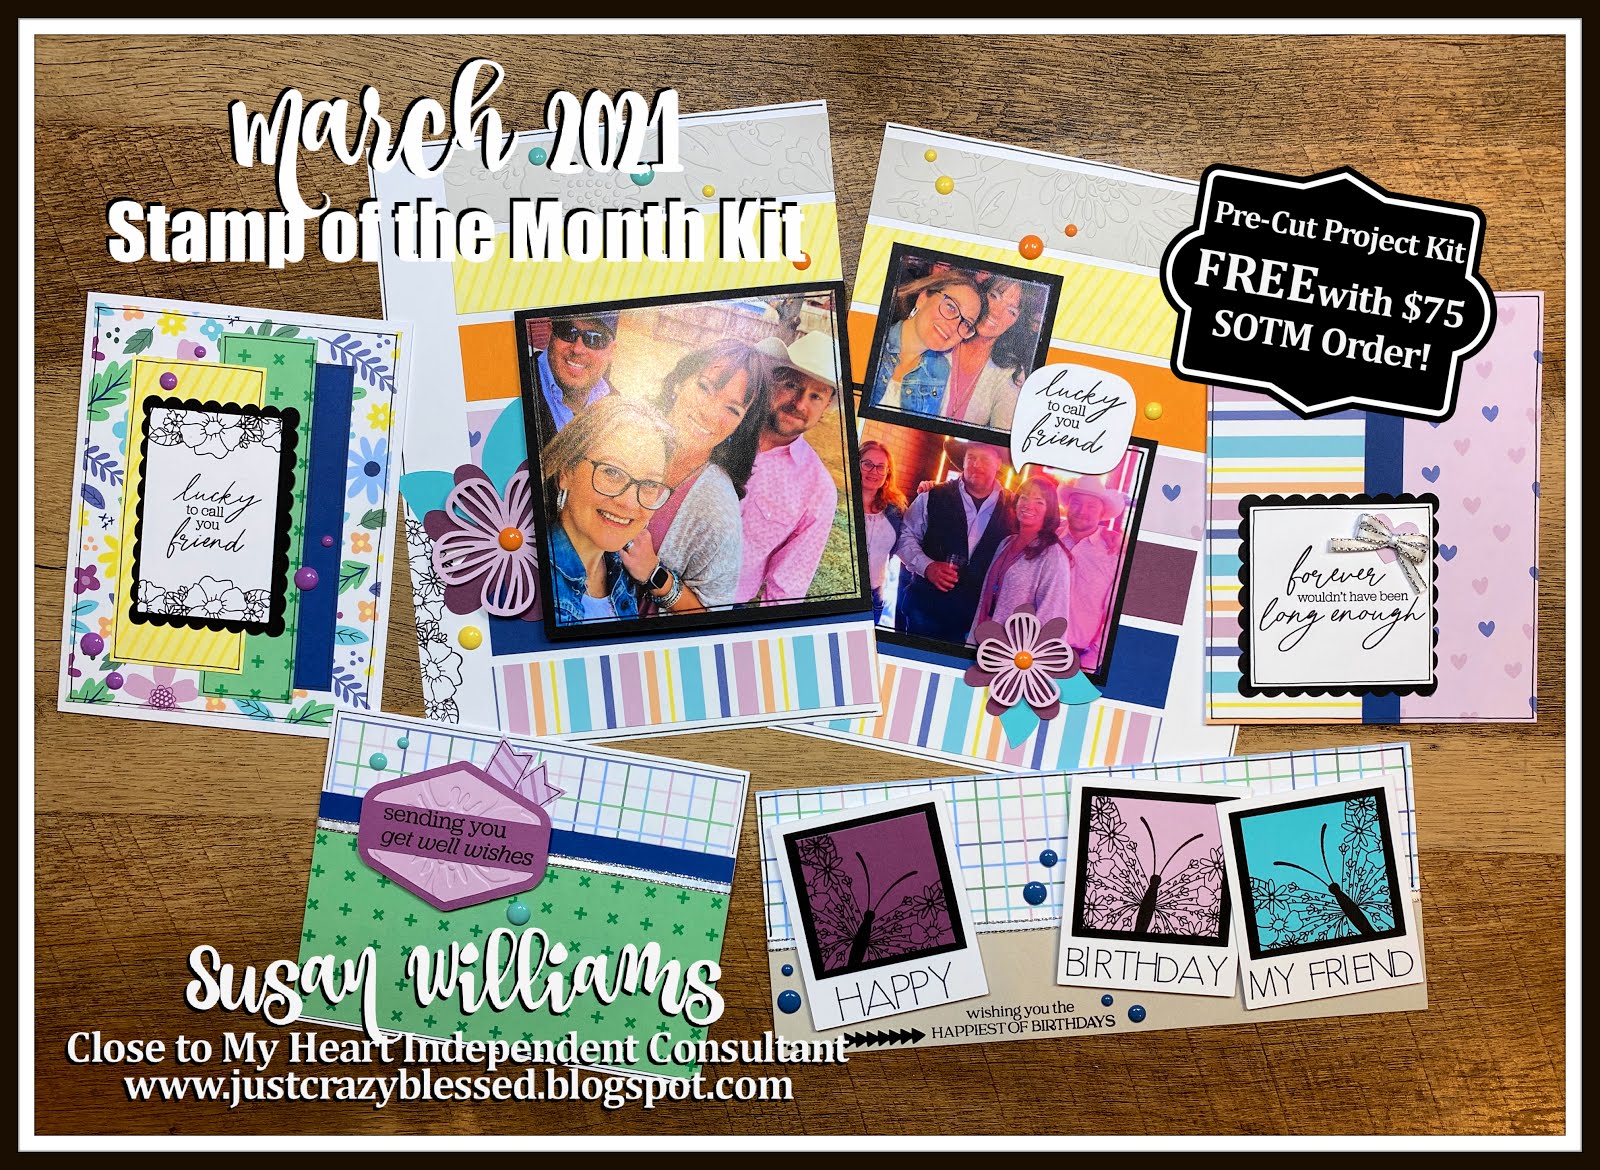 March 2021 Stamp of the Month Workshop!